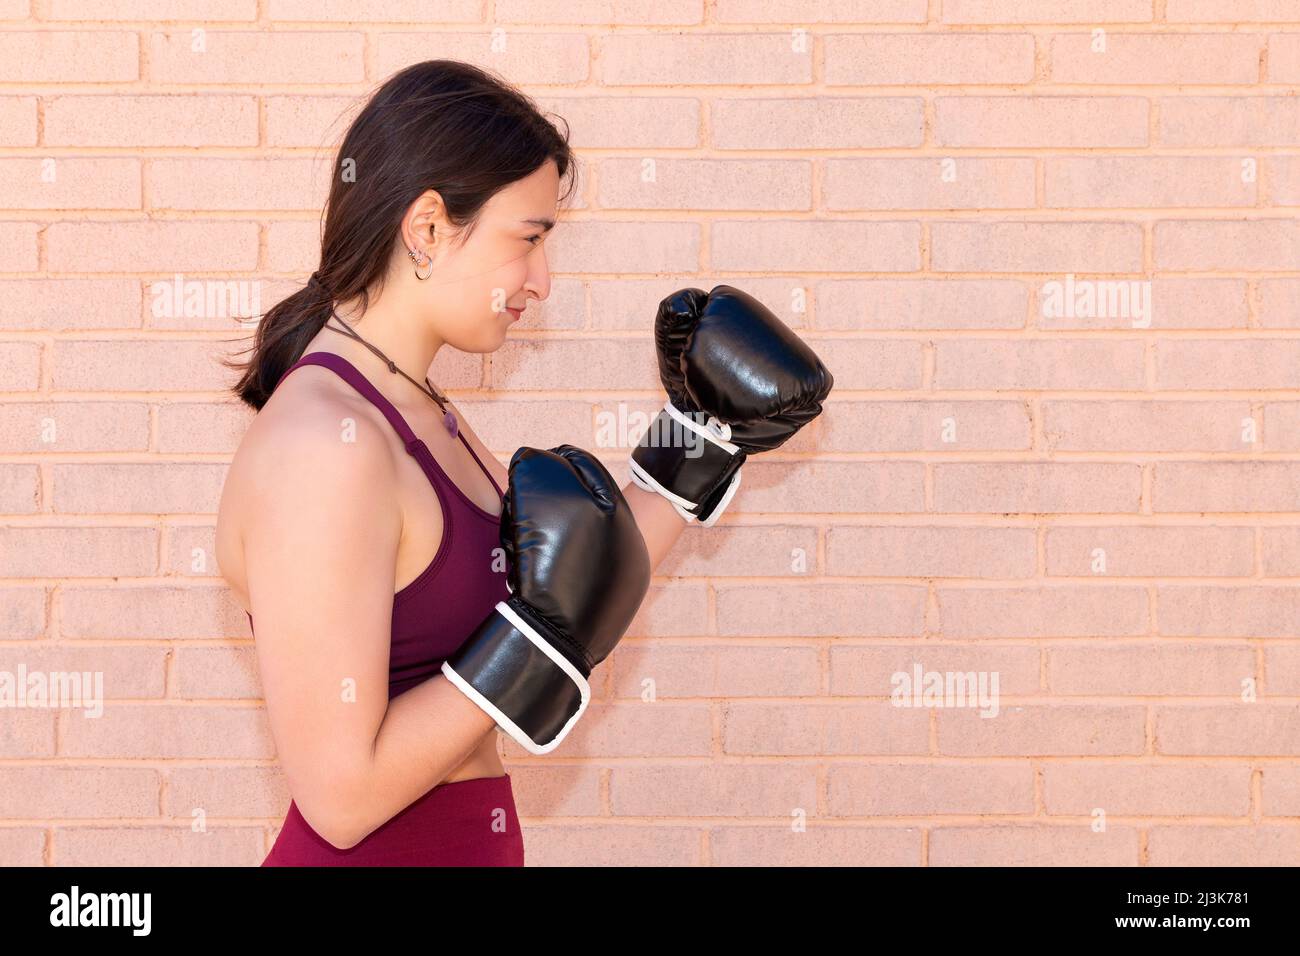 A young Caucasian woman wearing black boxing gloves in a defensive position seen from the side. In the background is a brick wall. Stock Photo